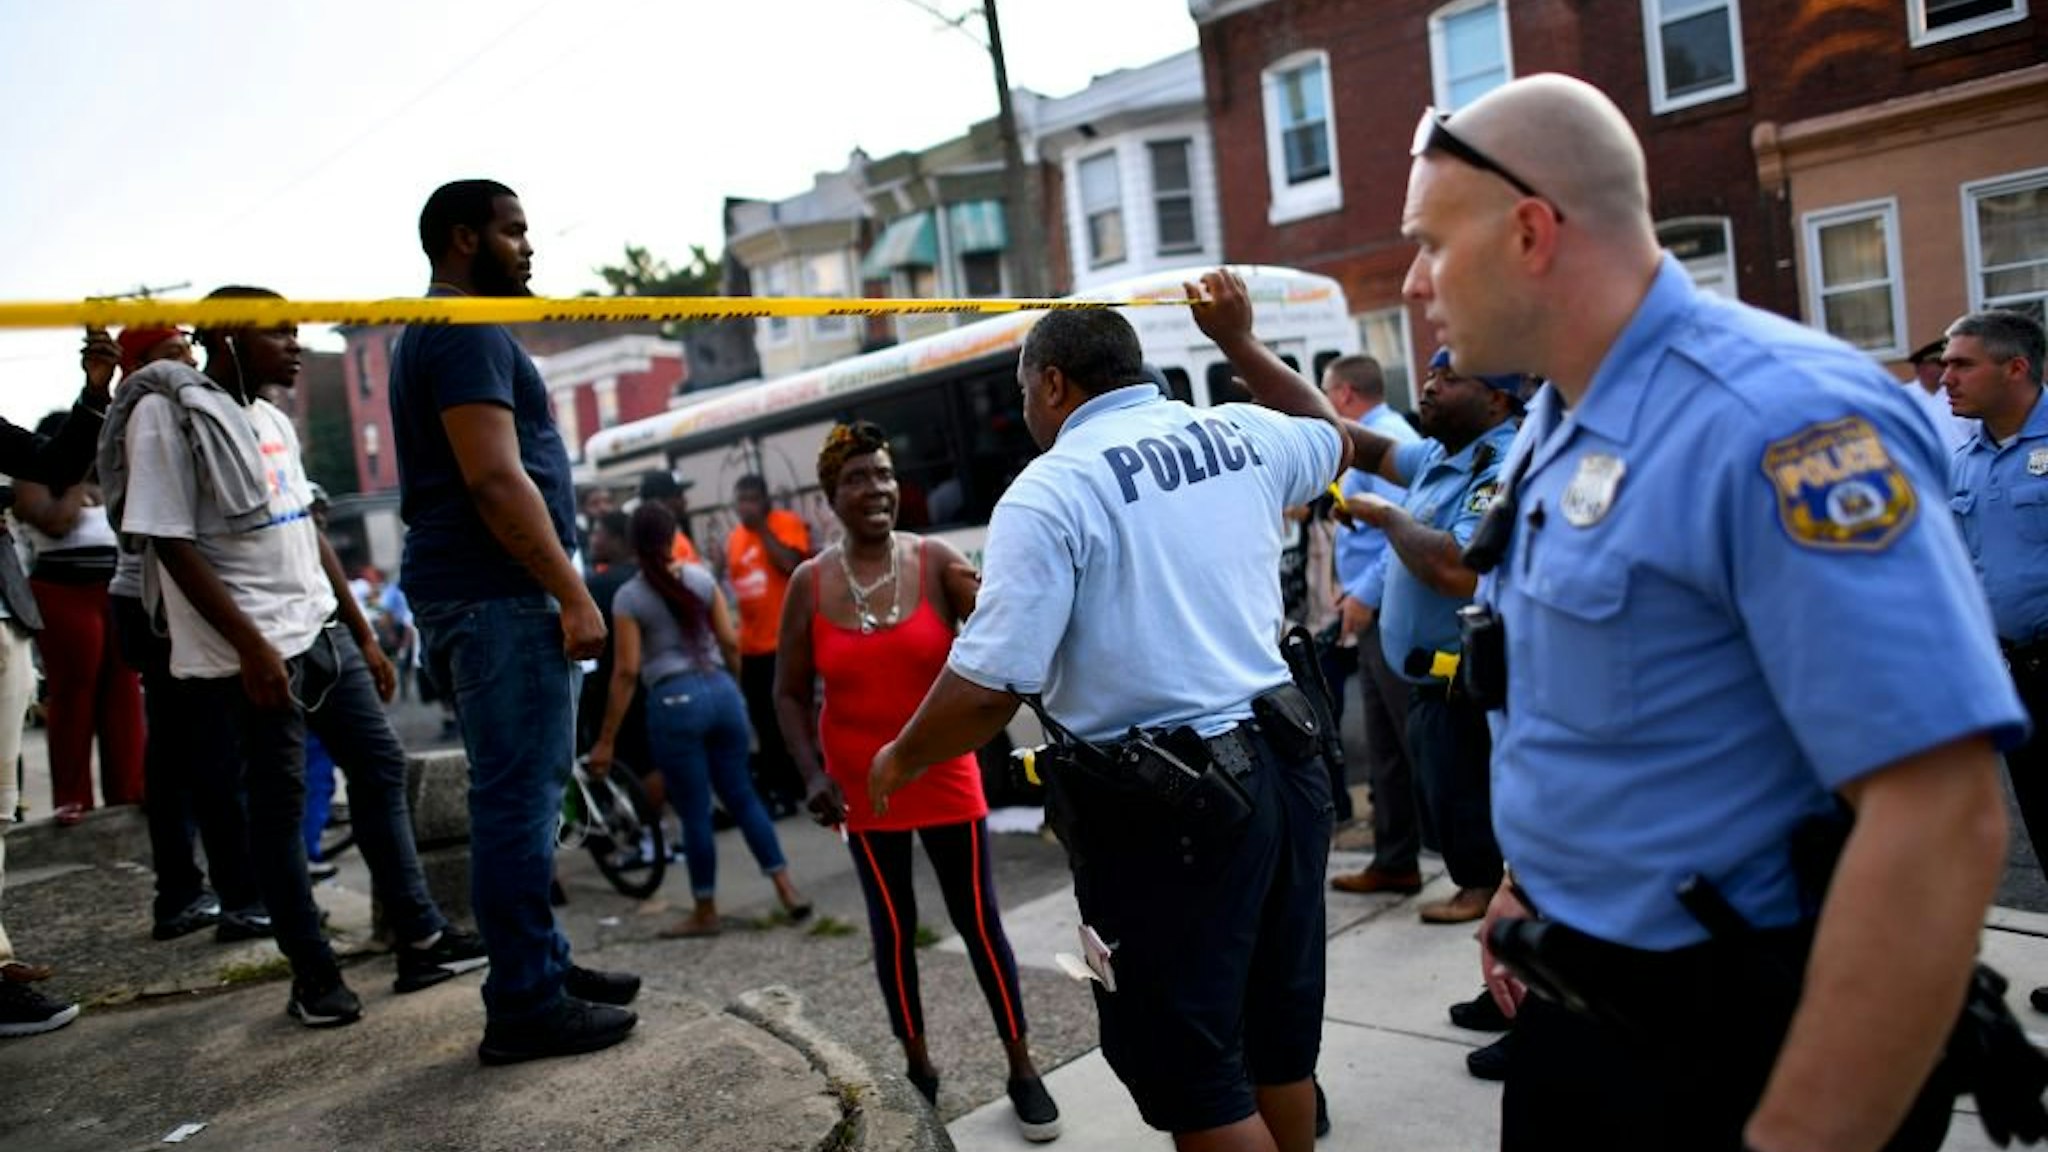 Police officers direct citizens to move back near the scene of a shooting on August 14, 2019 in Philadelphia, Pennsylvania. At least six police officers were reportedly wounded in an hours-long standoff with a gunman that prompted a massive law enforcemen